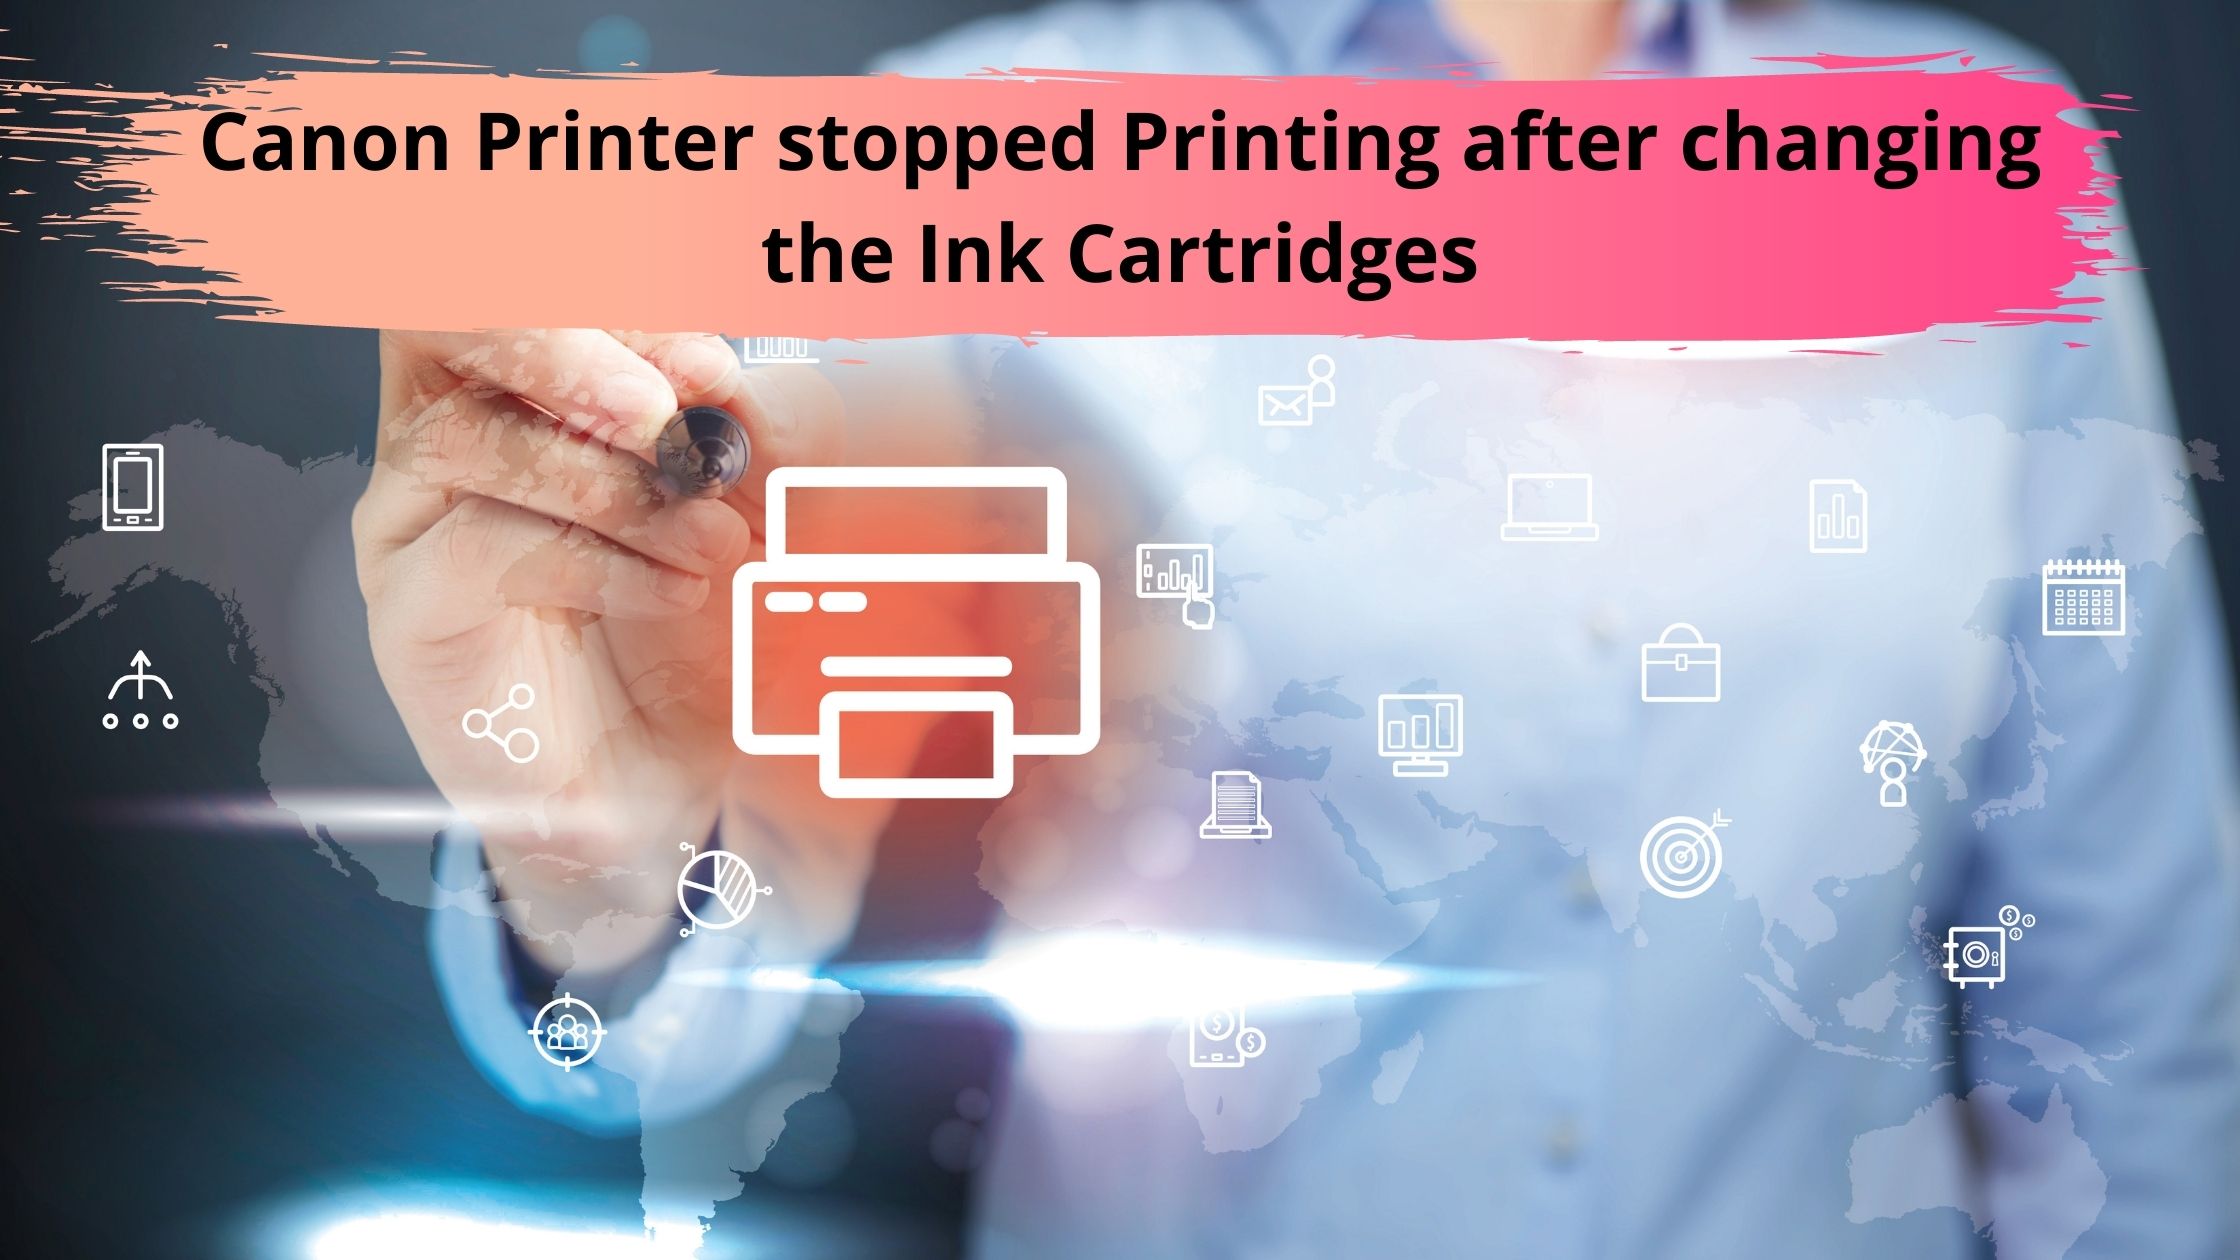 Canon Printer stopped Printing after changing the Ink Cartridges